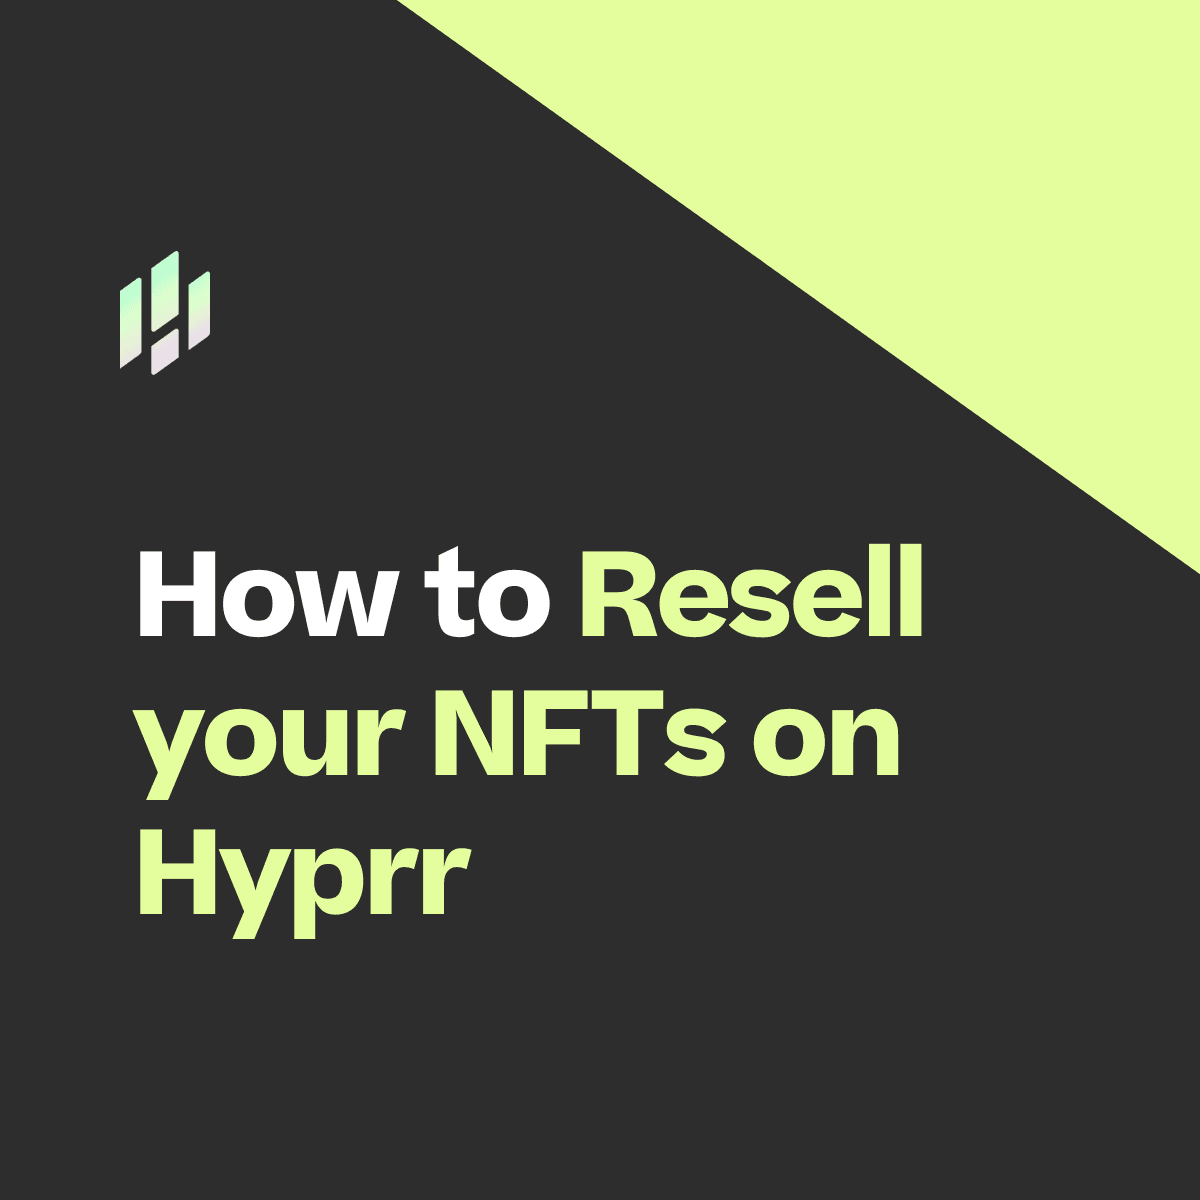 How to Resell your NFTs on Hyprr